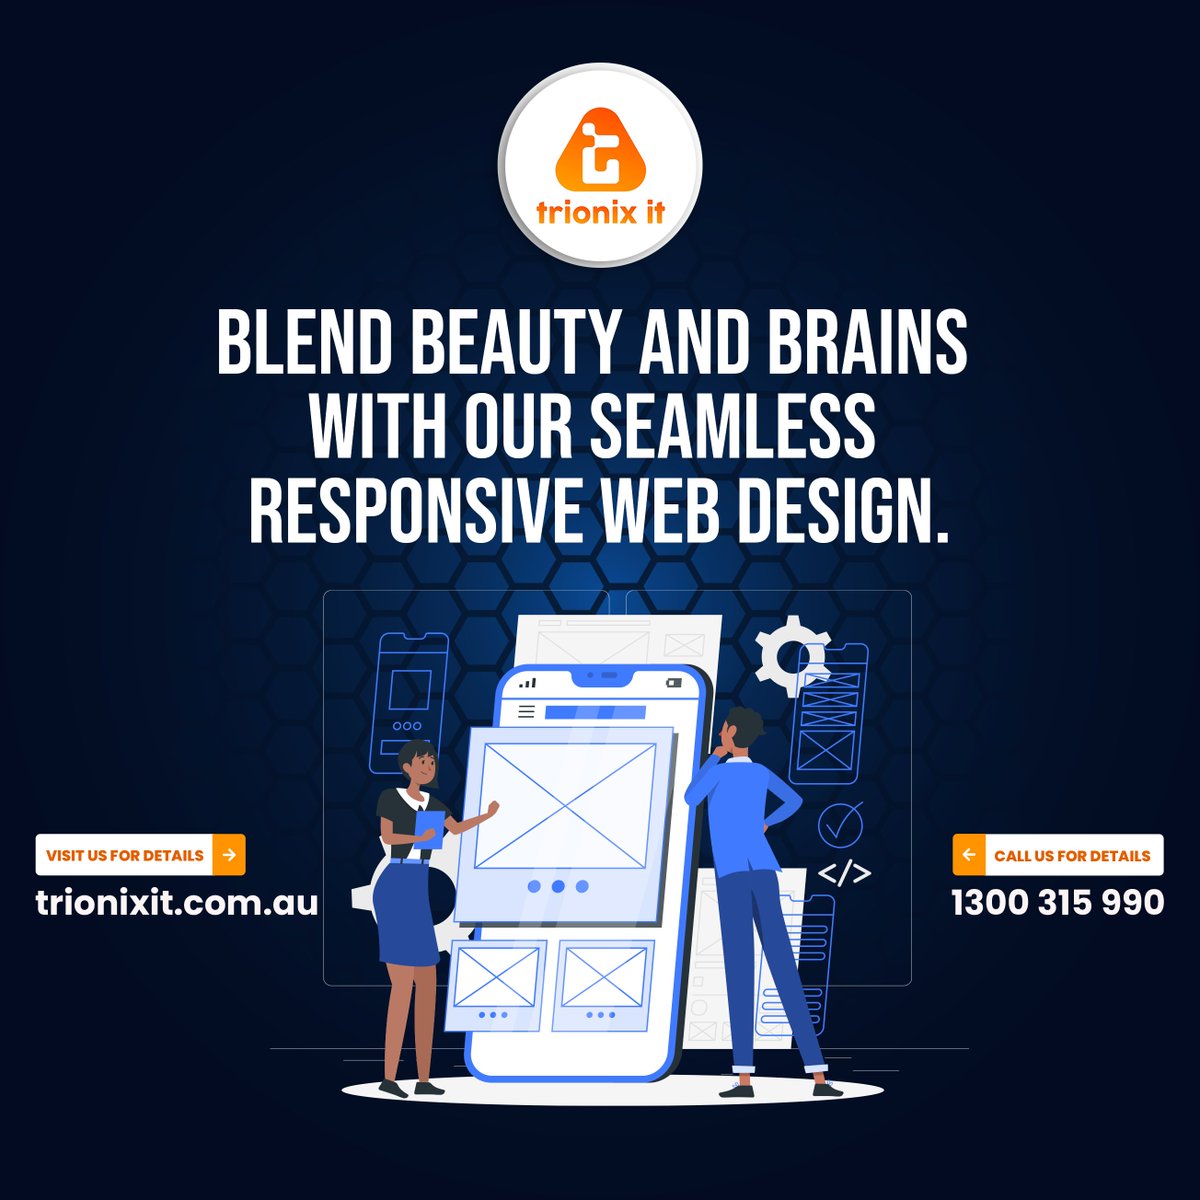 Dive into the perfect blend of beauty and brains with our exceptional #ResponsiveWebDesign! Elevate your online presence effortlessly. 💻✨ 

Visit our website trionixit.com.au or call 1300 315 990.

#WebDesign #DigitalElegance #BeautyAndBrains